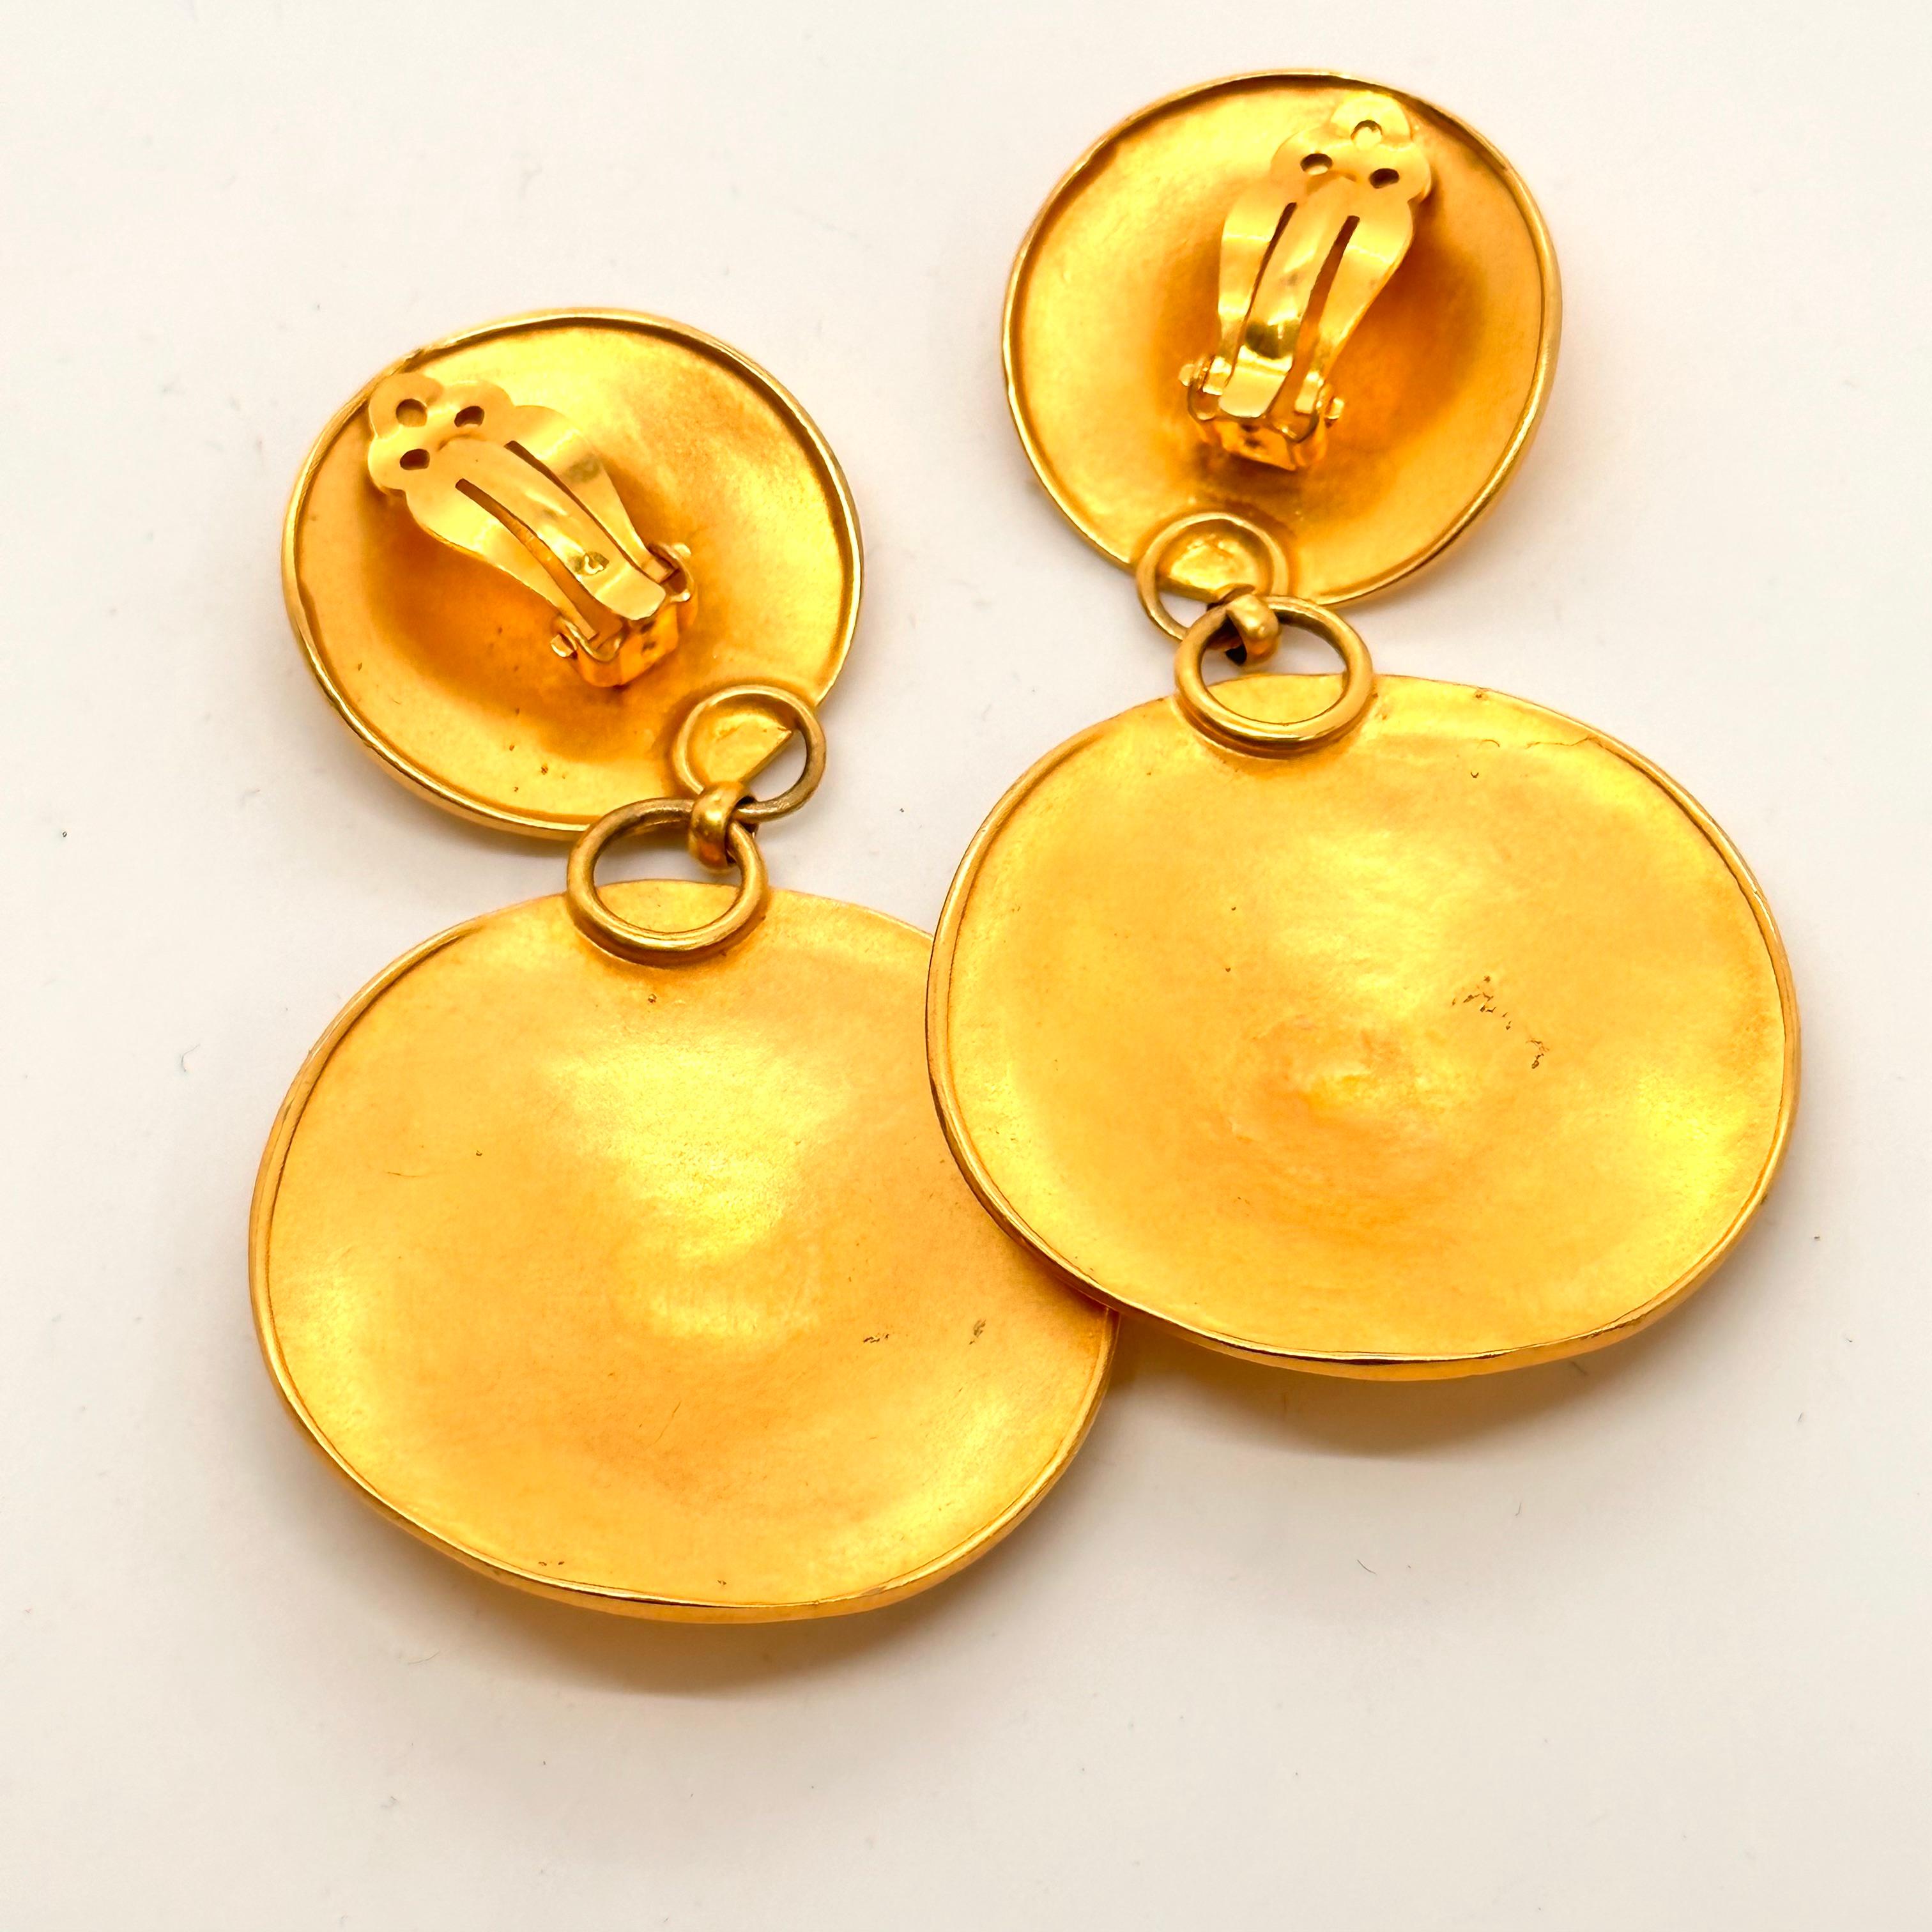 Very Iconic BOLD GOLD earrings from the decade of decadence, the 1980's. This pair of very recognizable Robert Lee Morris glamorous gold earrings are runway ready. The signature discs that define the organic quality of RLM jewelry are 3.25